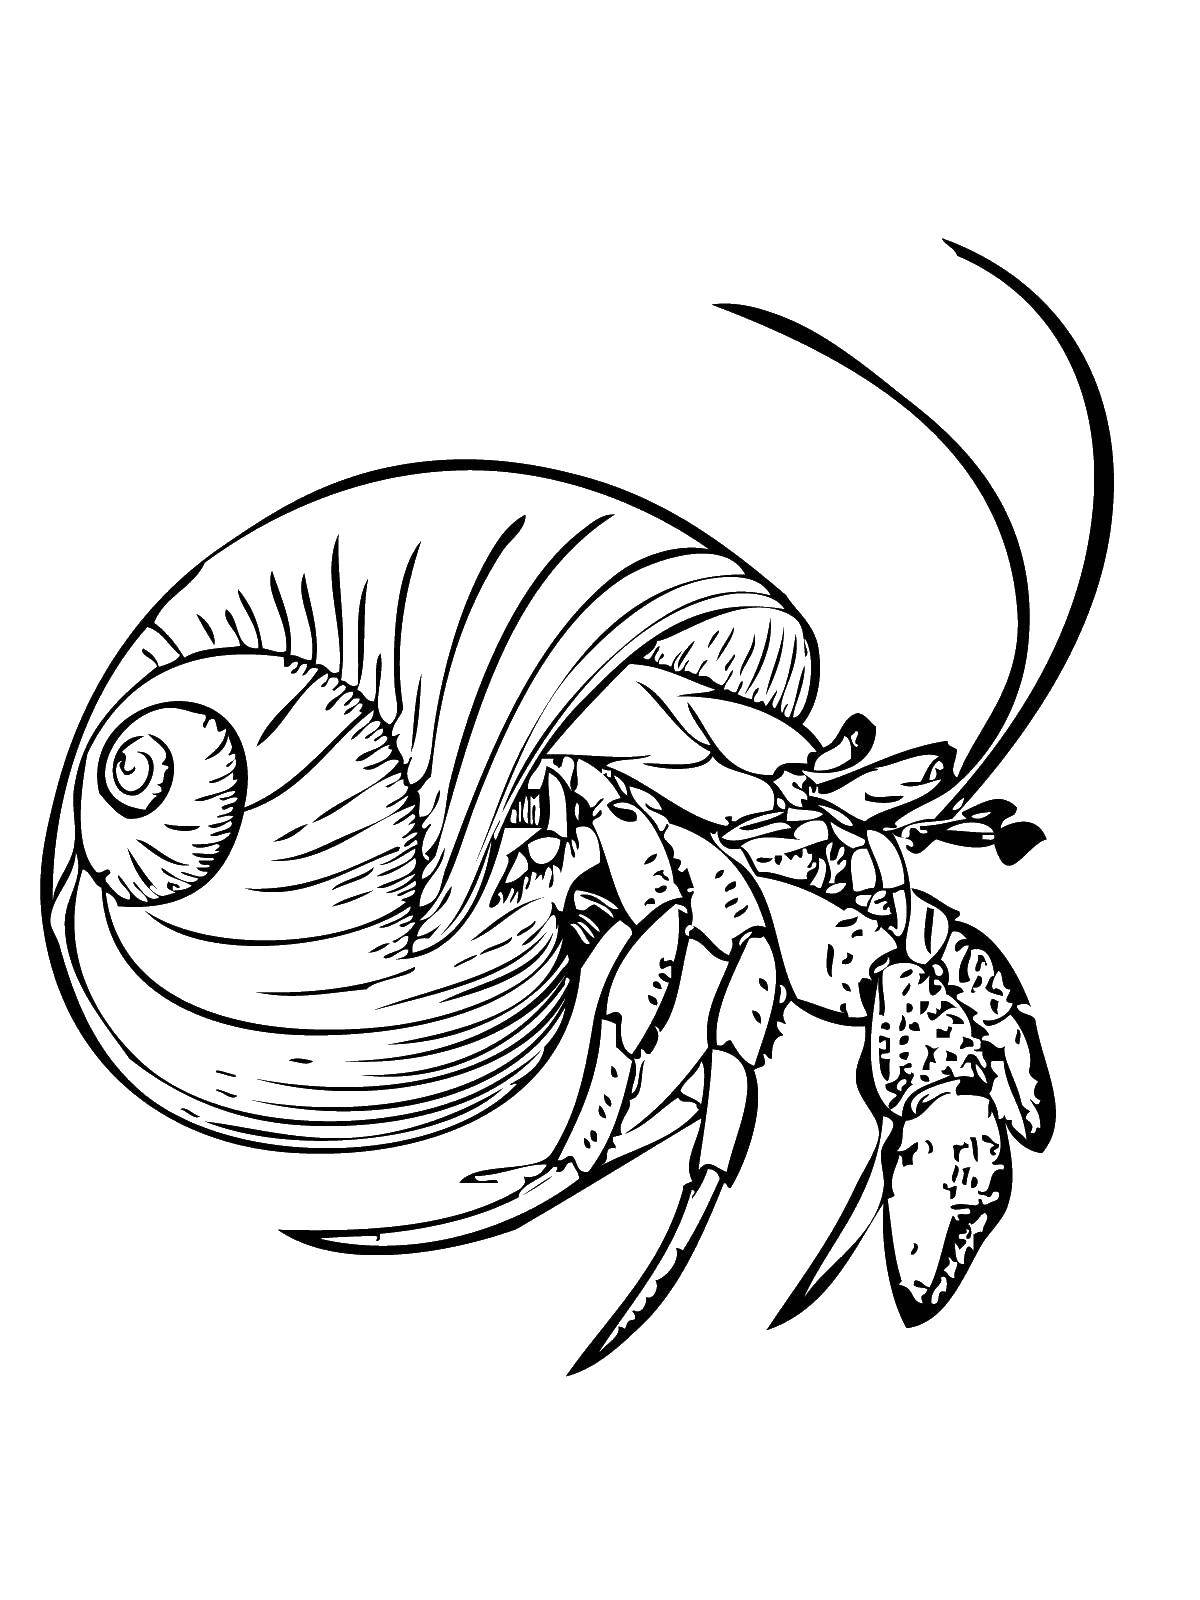 Coloring Crab hermit. Category Crab. Tags:  crab, hermit, shell, marine life.